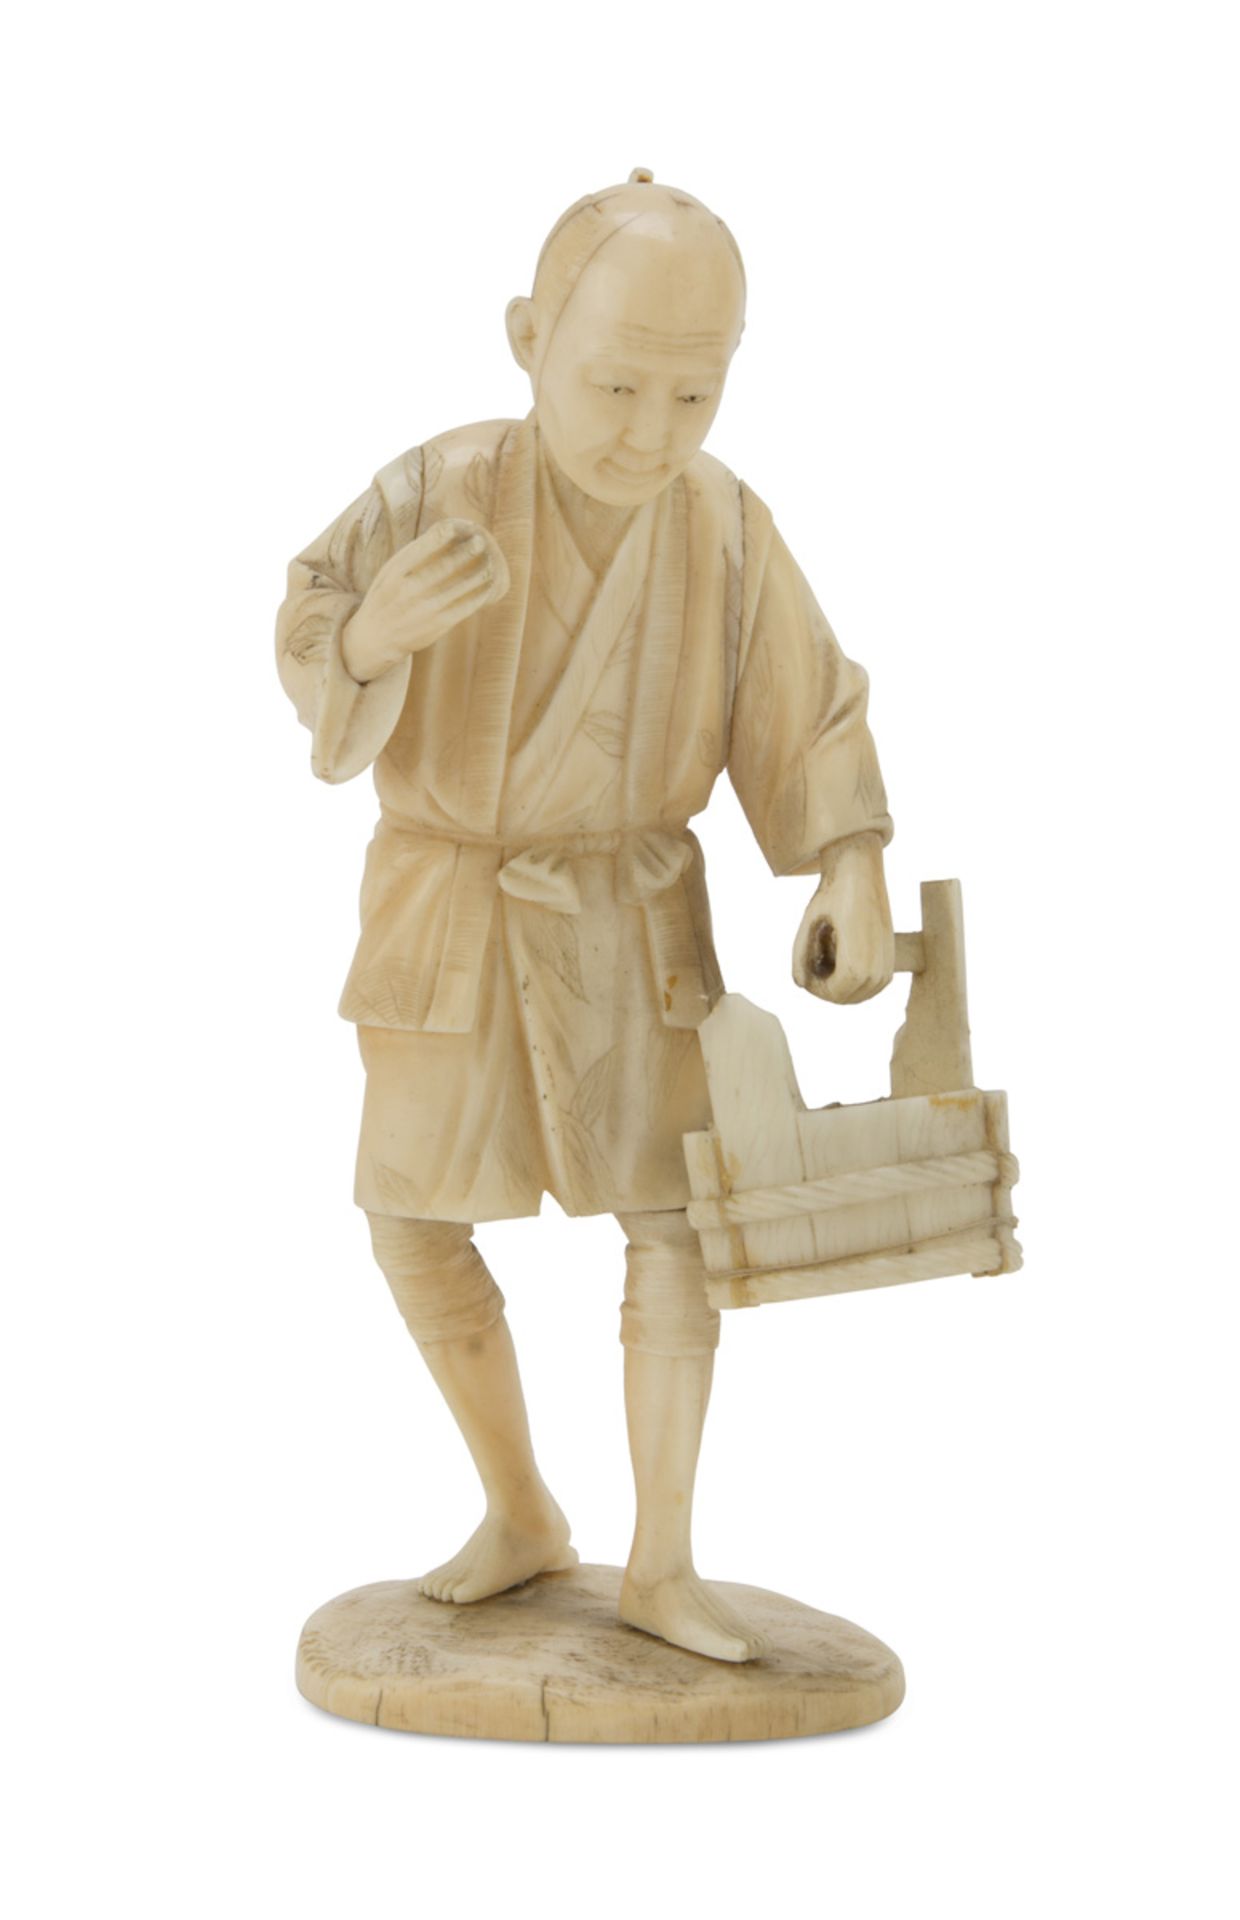 SCULPTURE IN IVORY, JAPAN LATE 19TH CENTURY representing a farmer with basket. Measures cm. 13 x 7 x